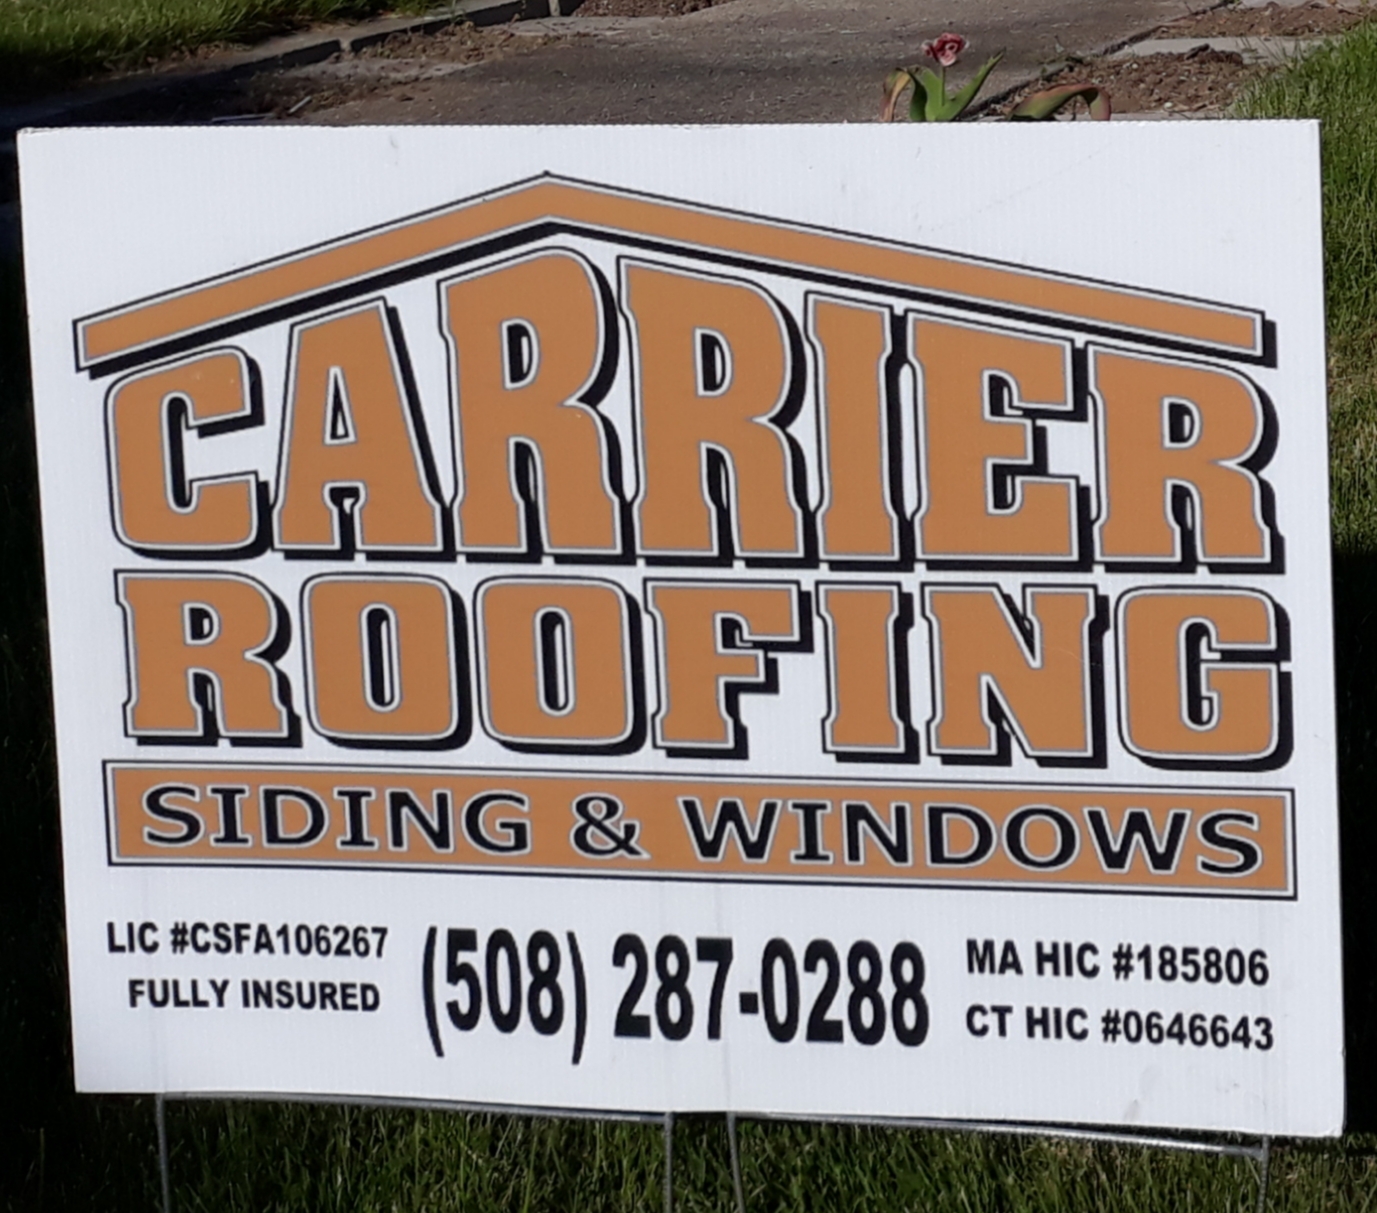 CARRIER ROOFING SIDING & WINDOWS